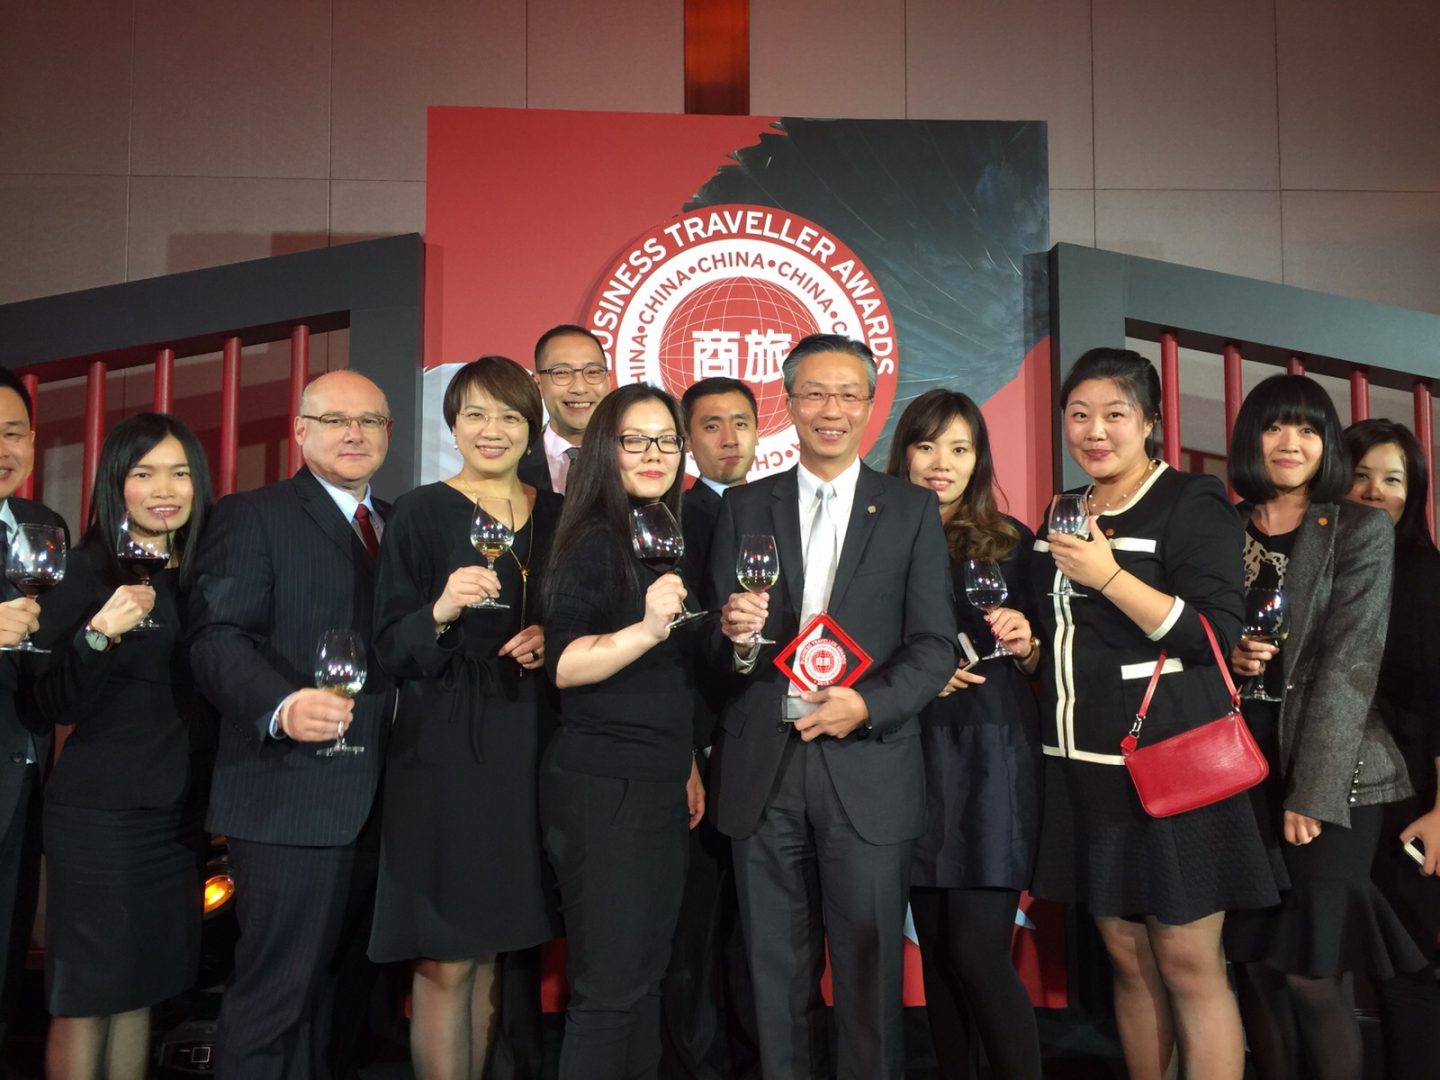 Choe and his team celebrating at the Business Traveller China Awards ceremony